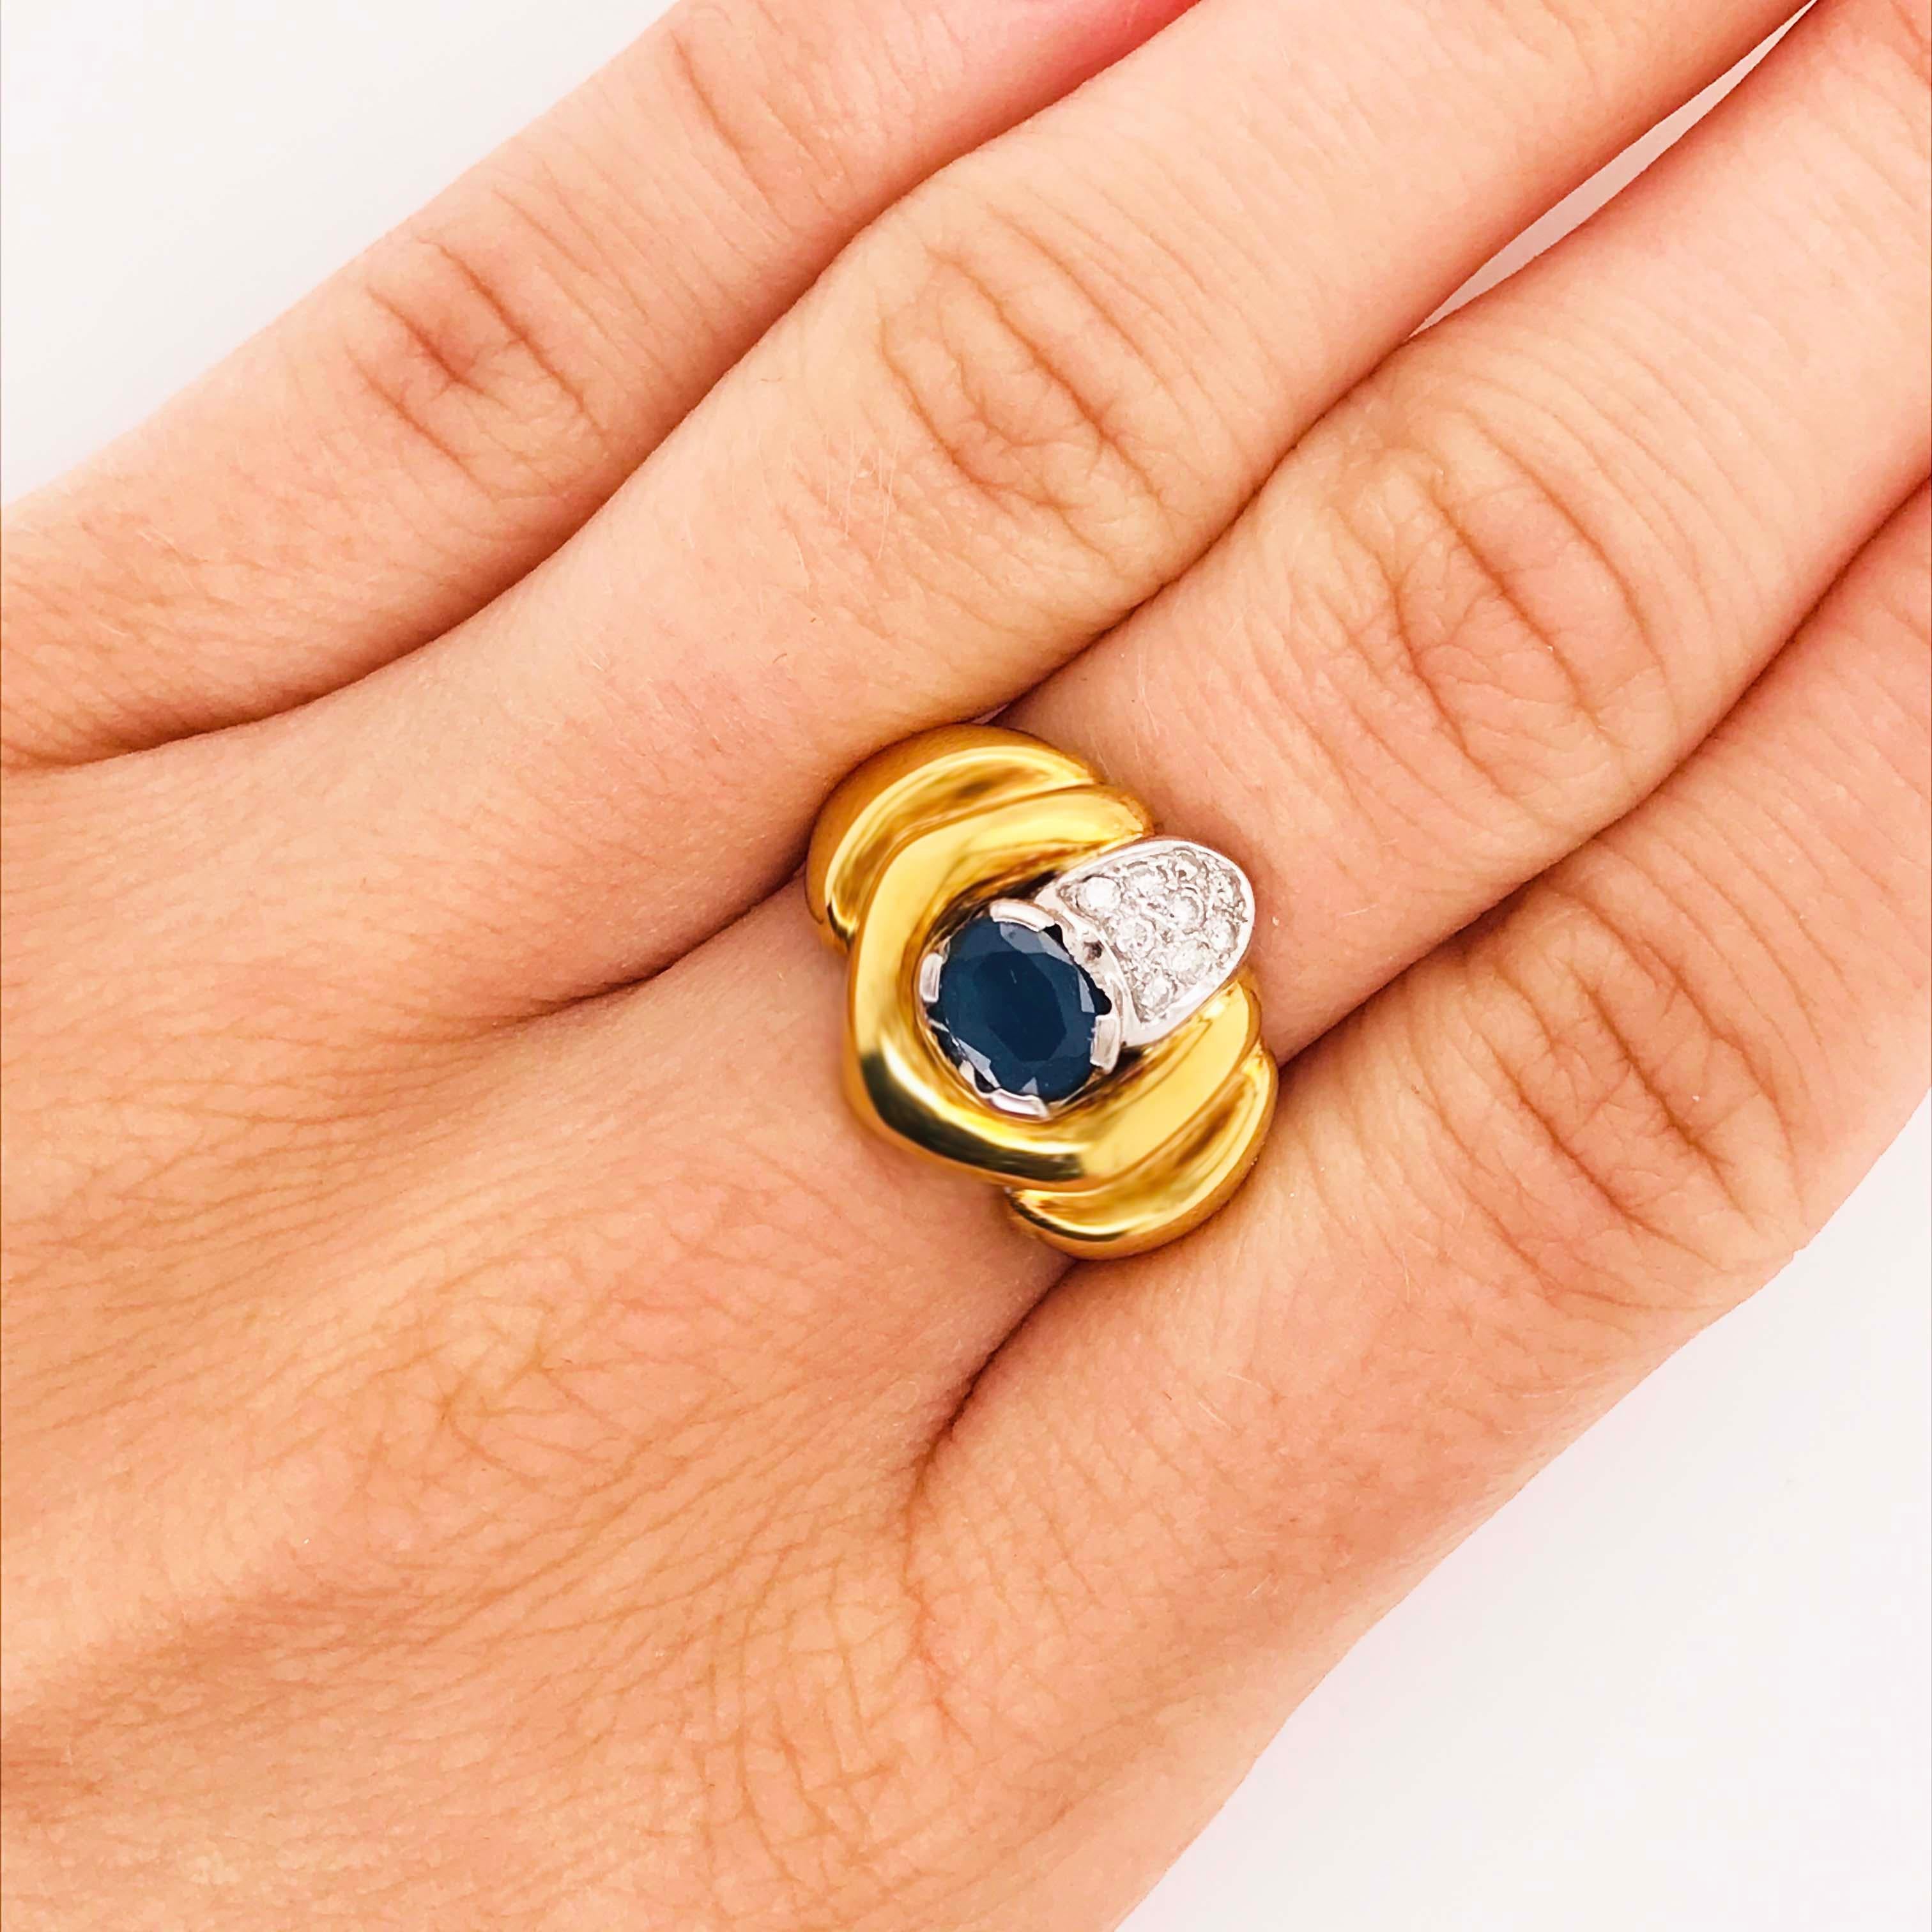 This 18 karat yellow gold sapphire and diamond ring is a custom-made, one-of-a-kind ring this is quite striking!  The ring has a very low profile so is excellent if you have to wear gloves or you don't like rings with height.  The design would be